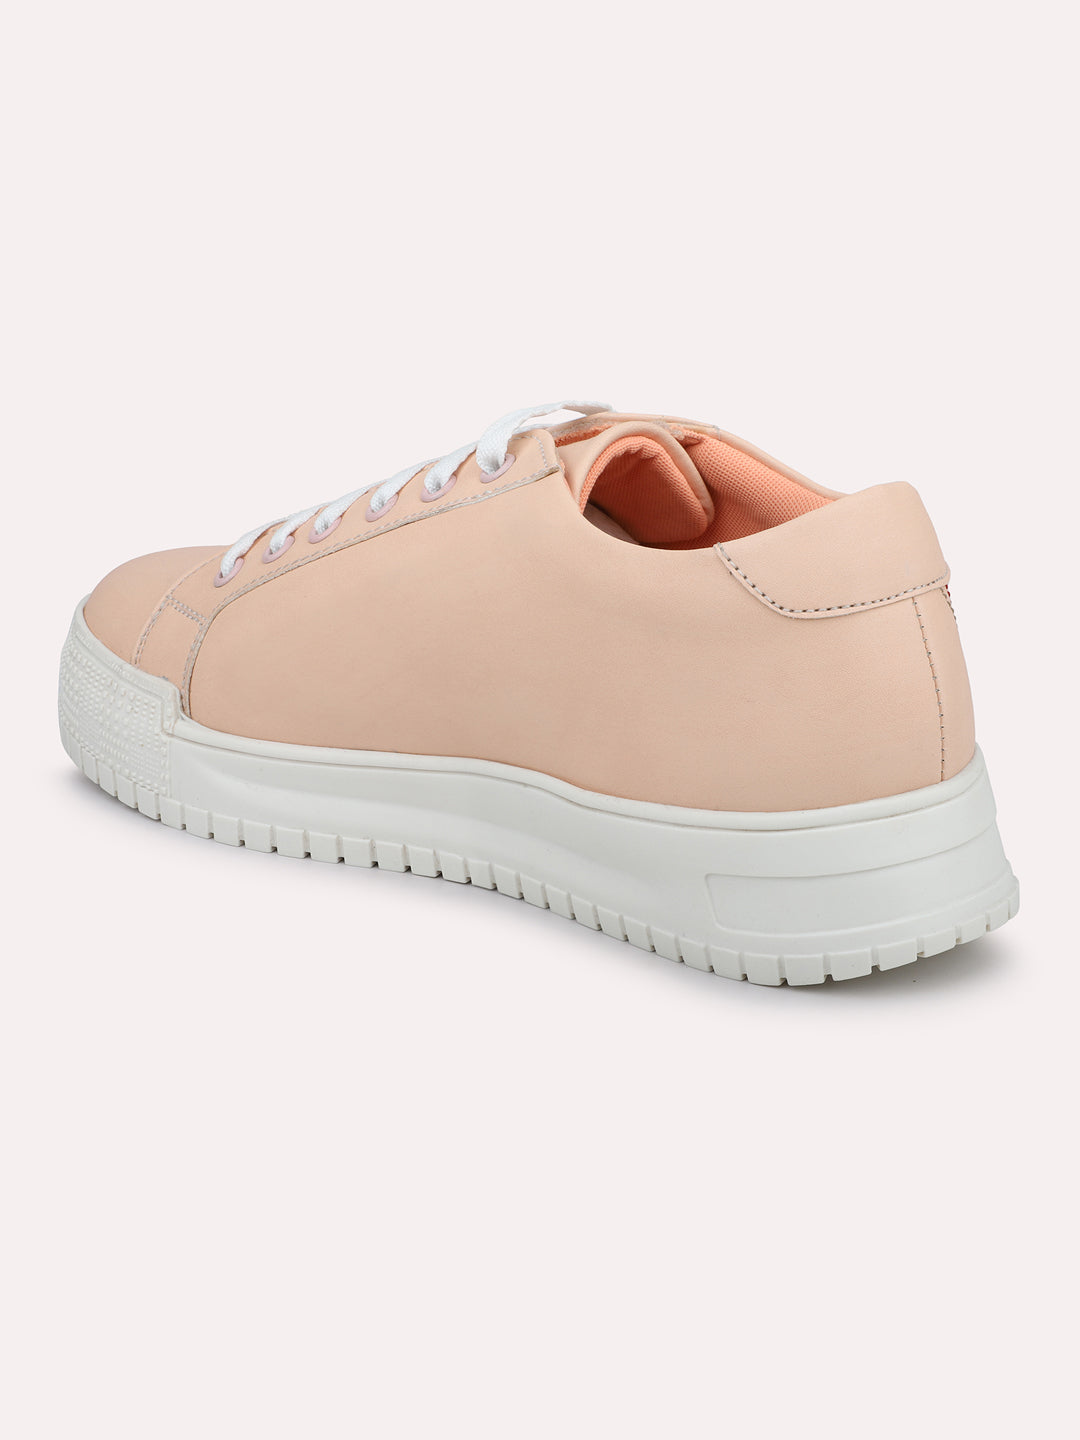 Women Peach Solid Casual Sneakers